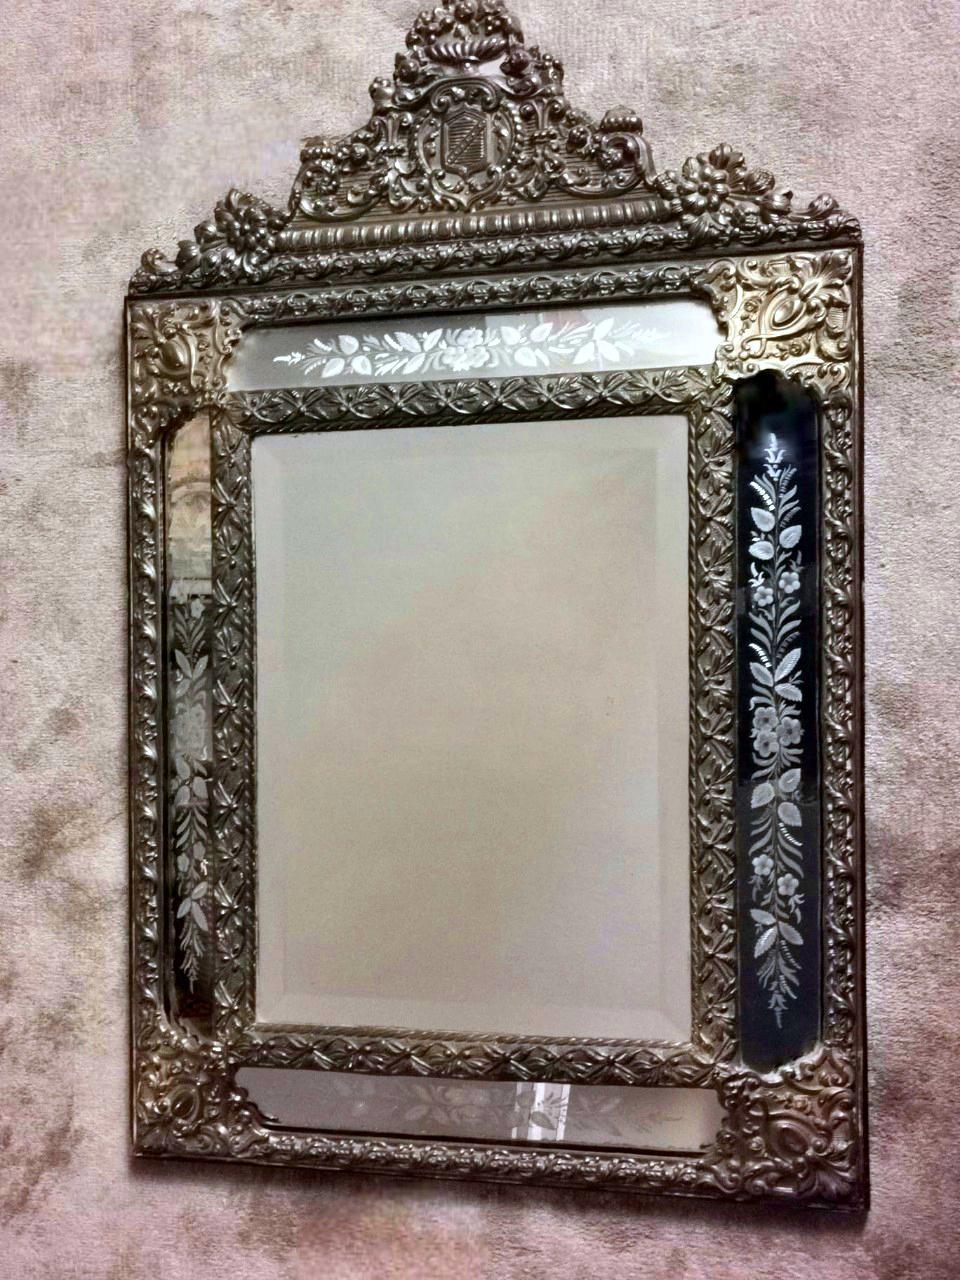 We kindly suggest that you read the entire description, as with it we try to give you detailed technical and historical information to guarantee the authenticity of our objects.
Huge and imposing brass plate frame from the Napoleonic era with a